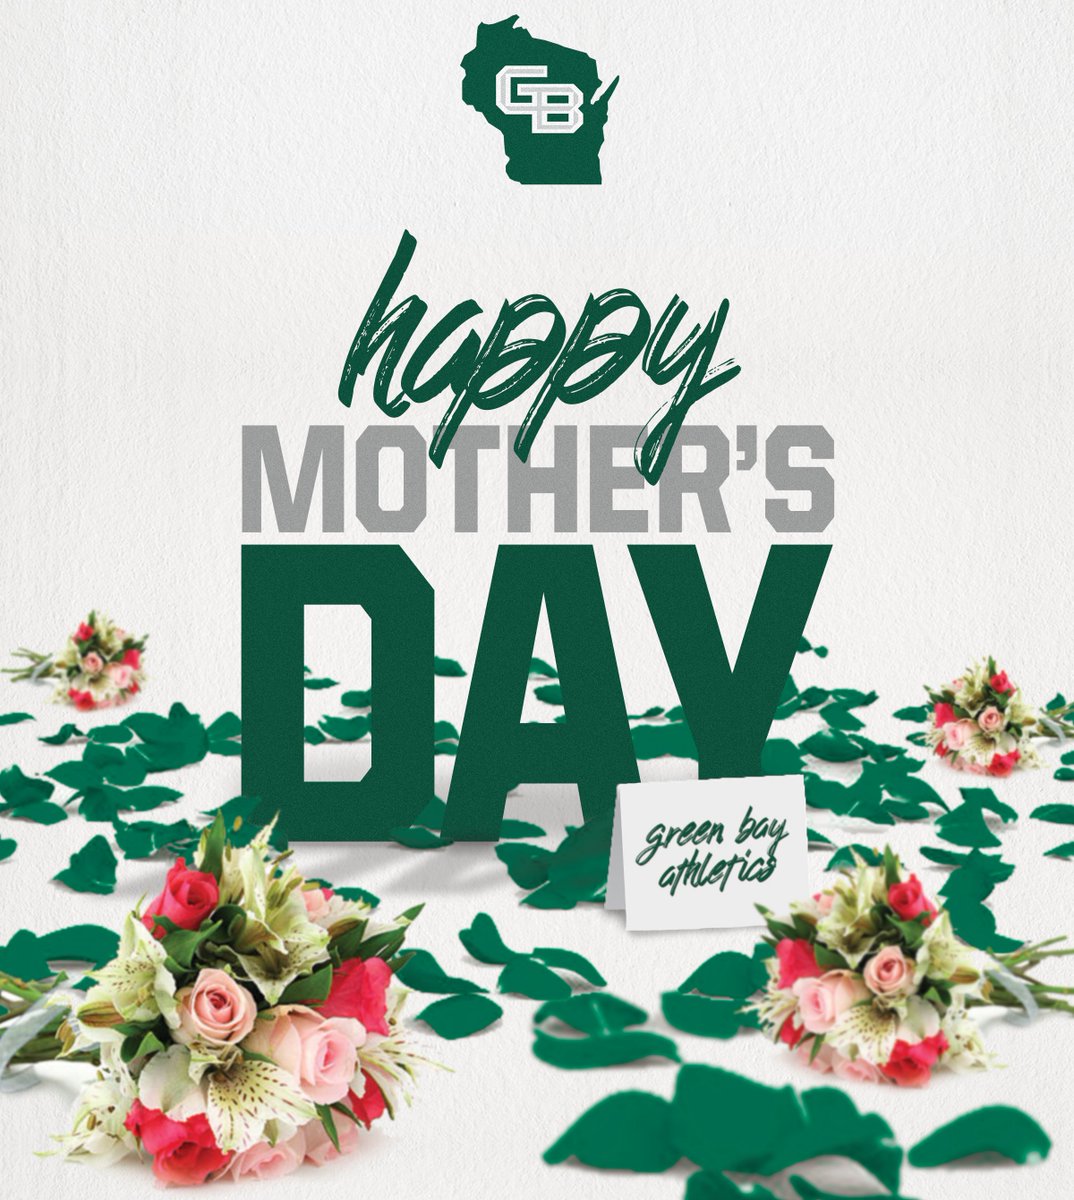 Happy Mother's Day! 💐 #RiseWithUs